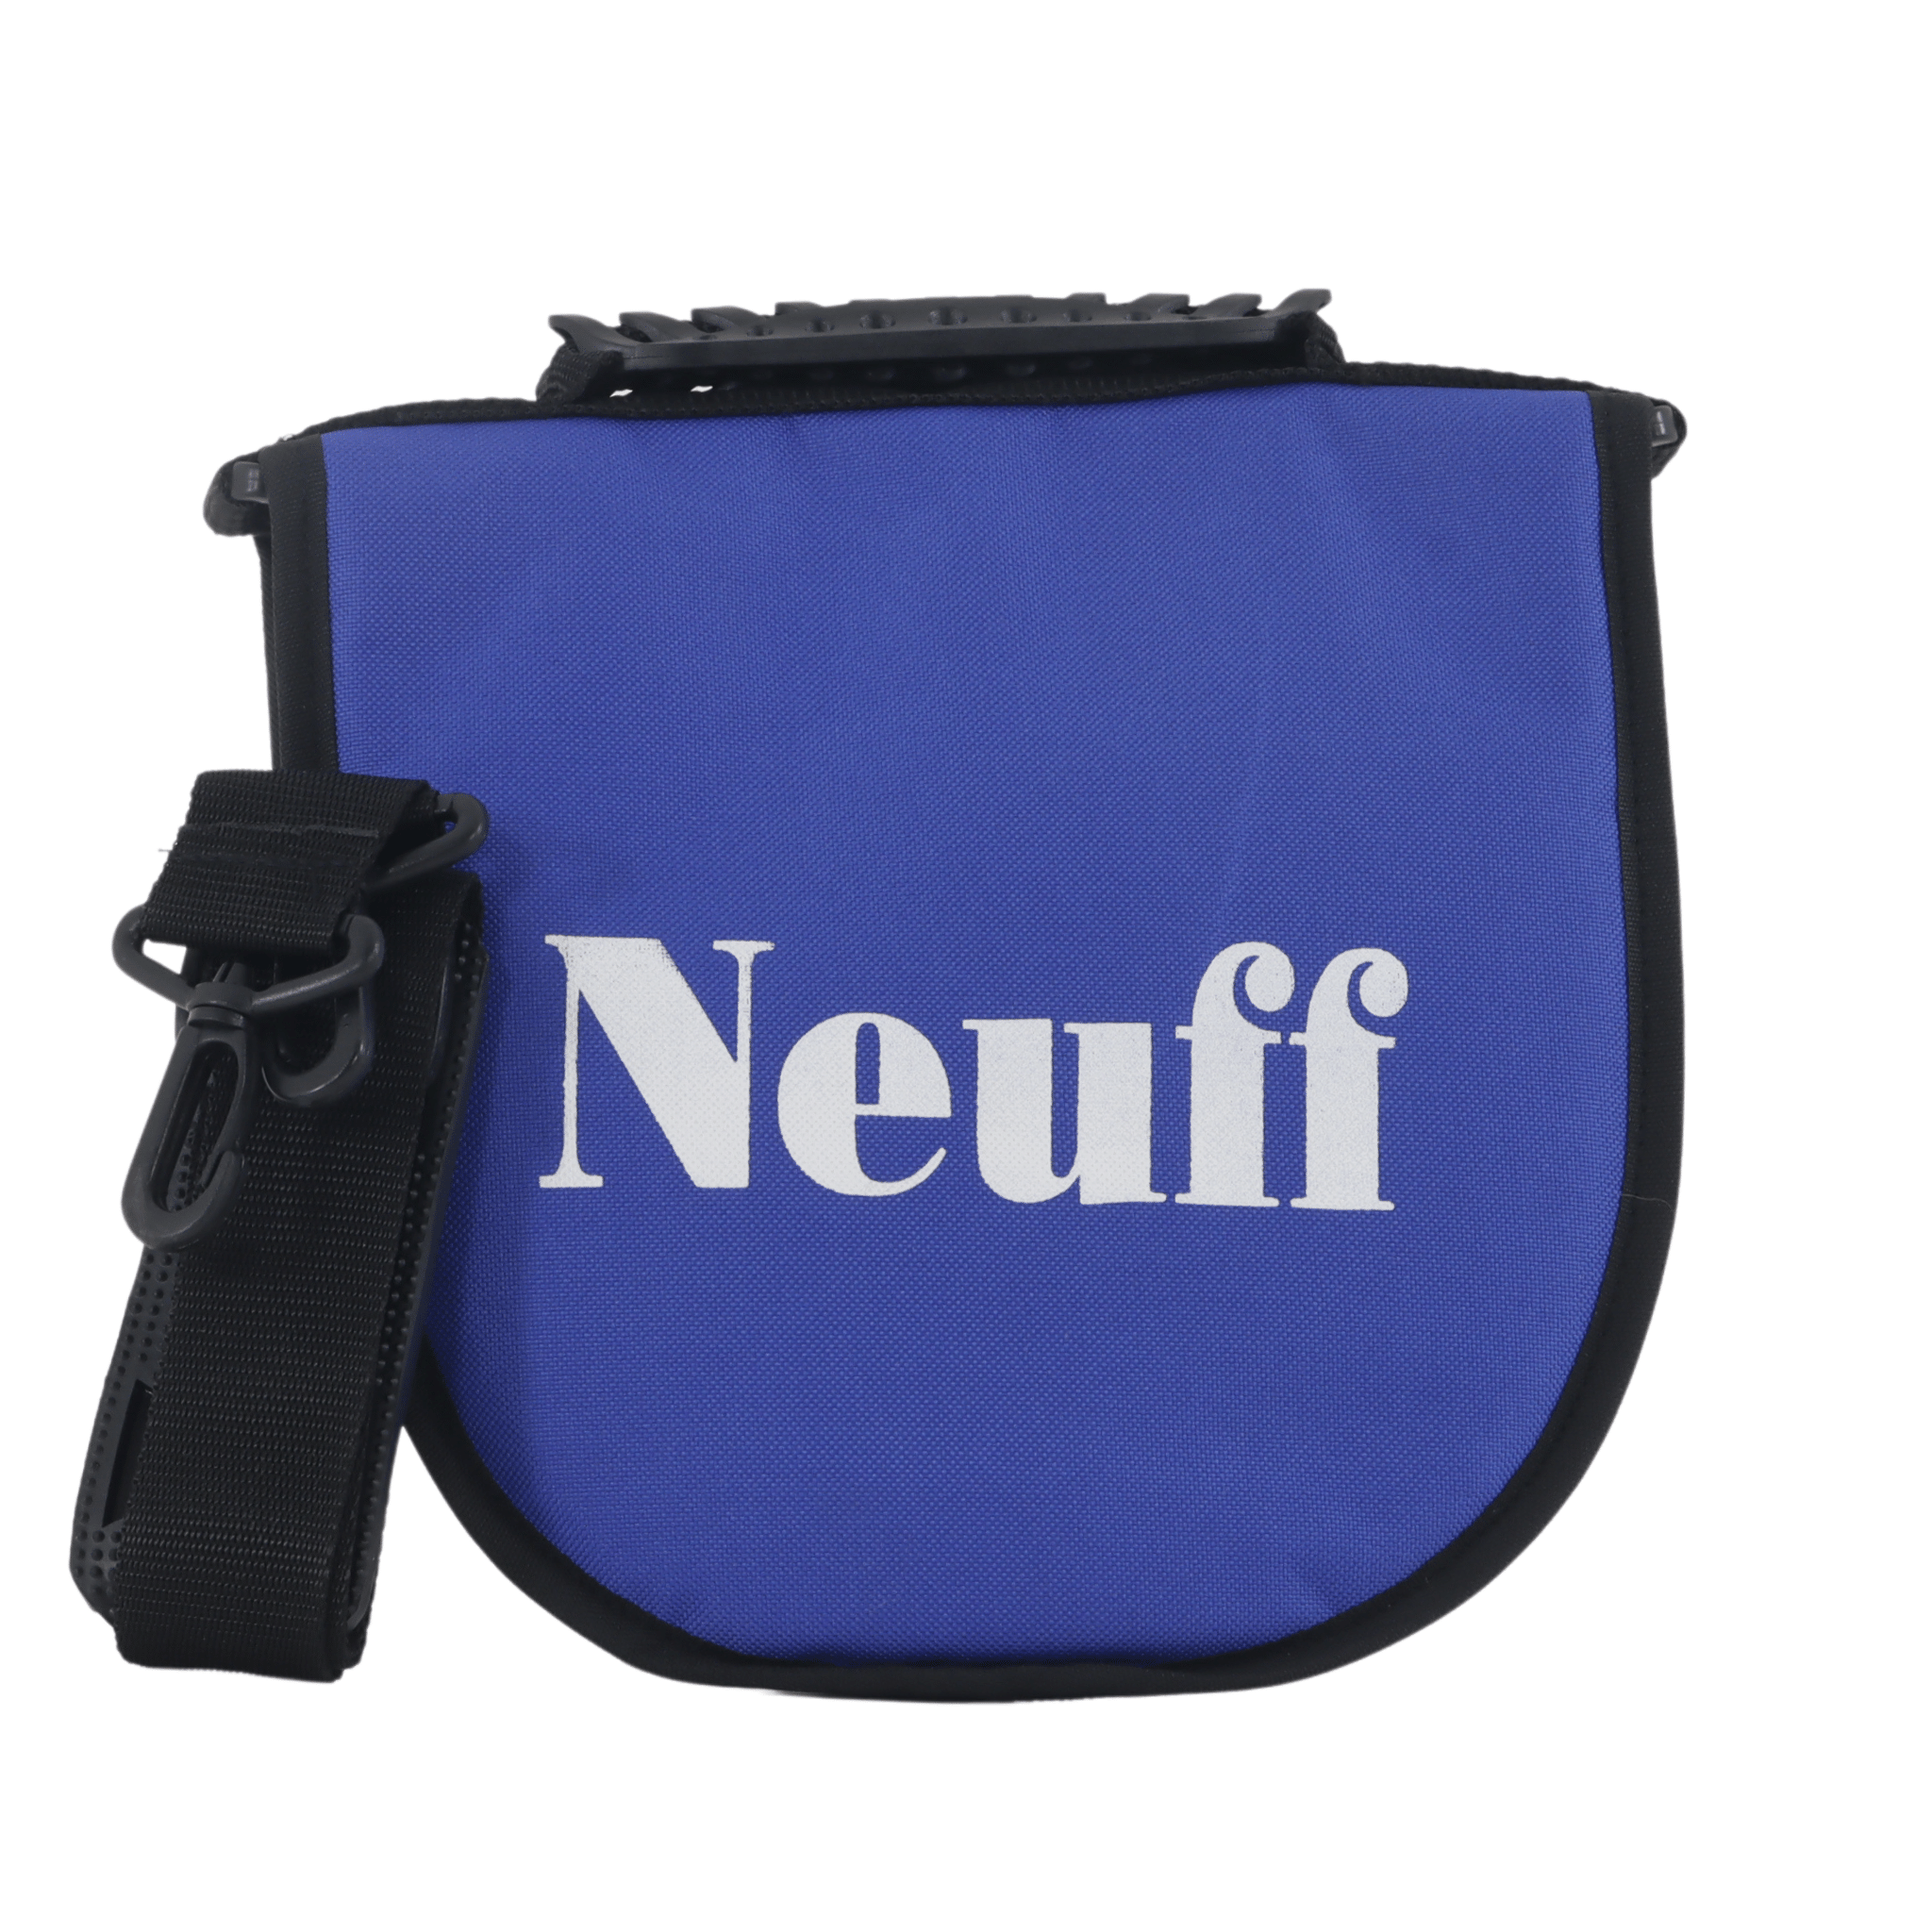 Royal blue padded double discus bag hold two discus